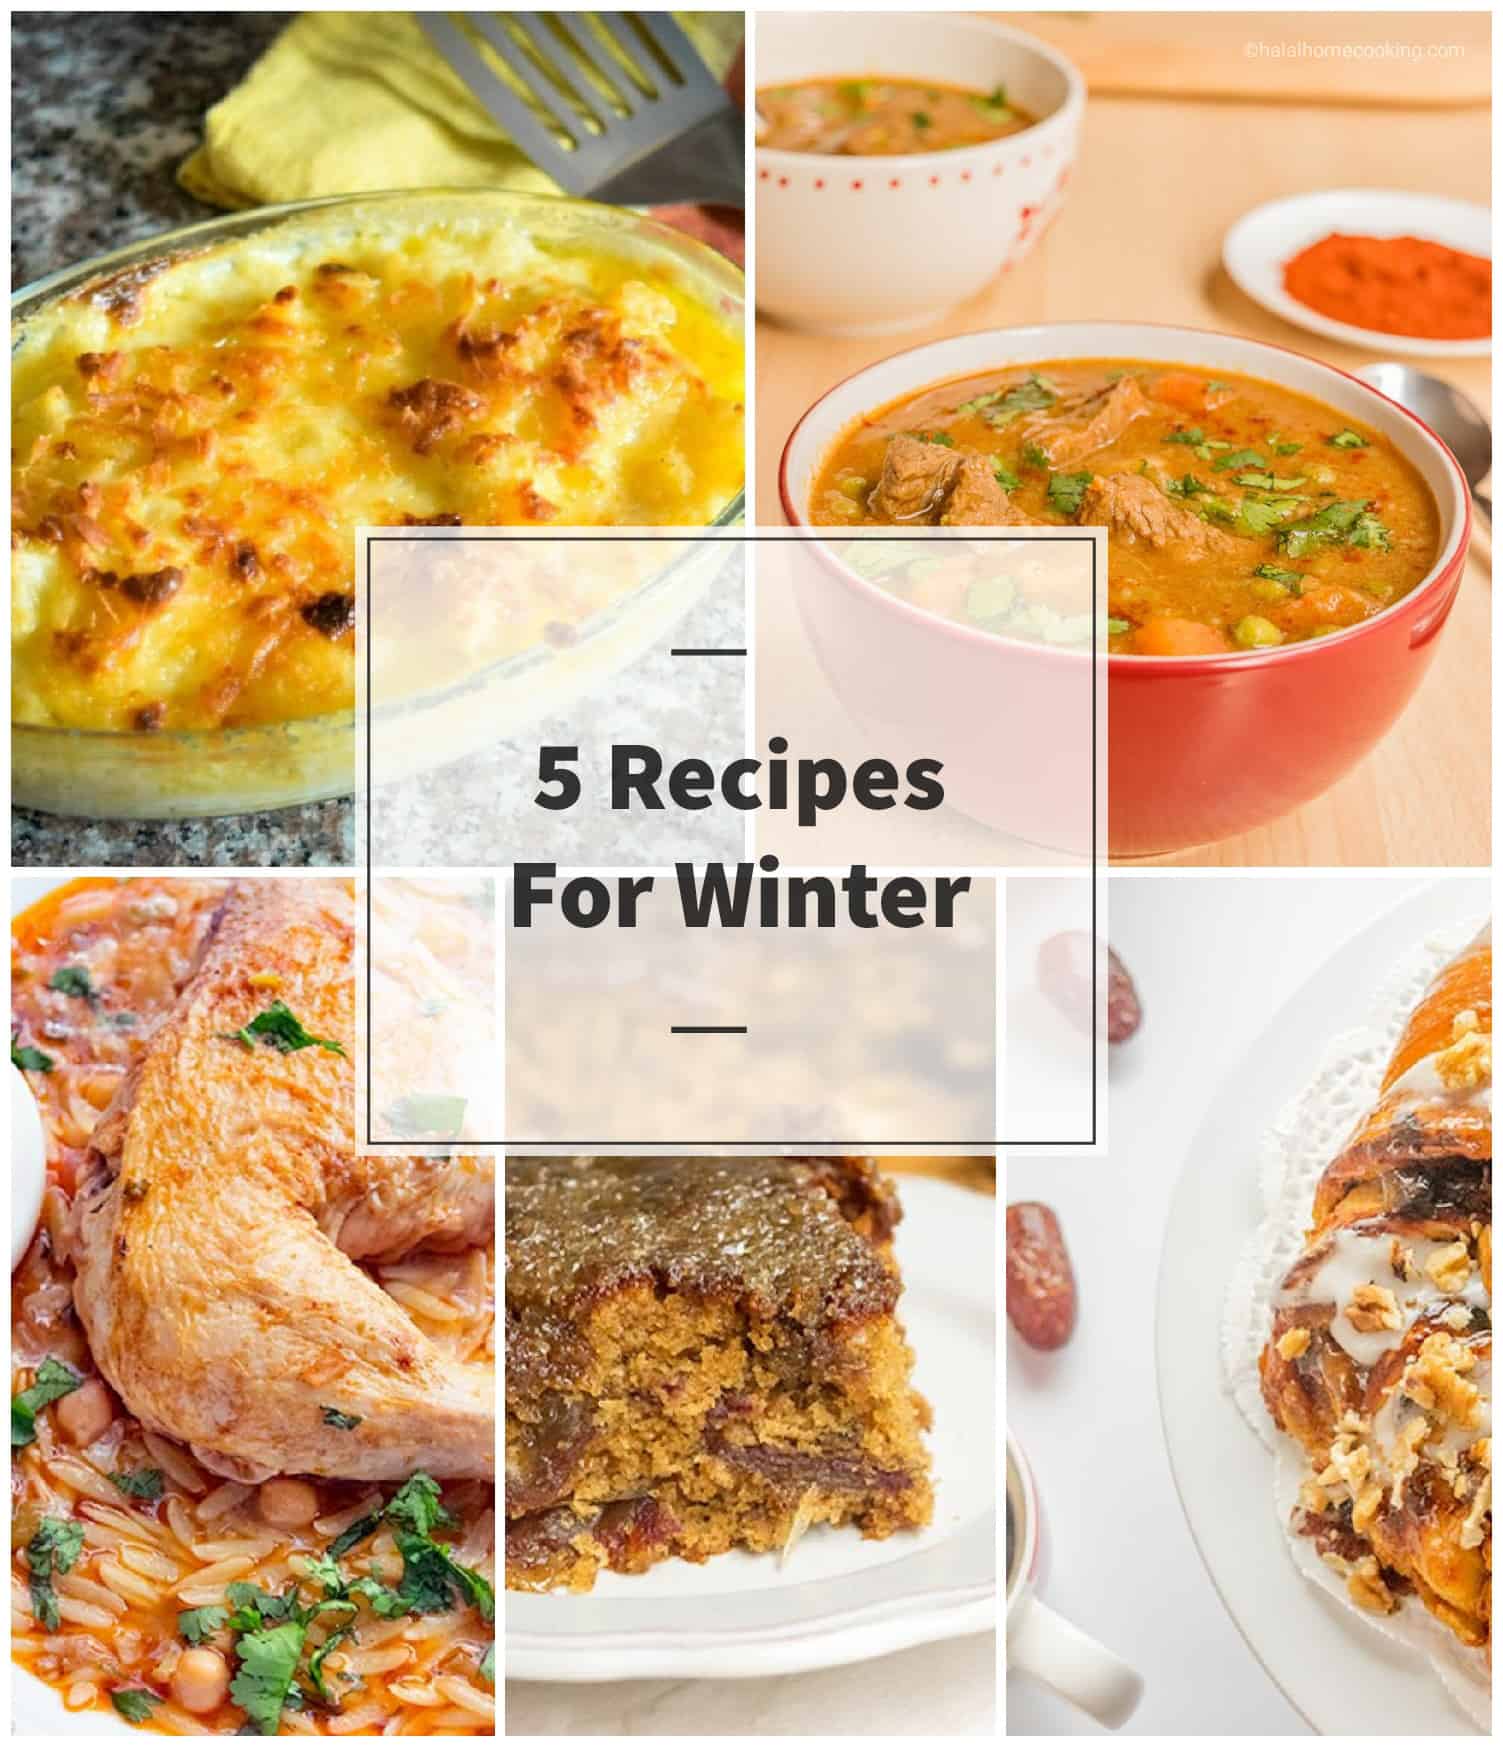 5 Recipes For Winter